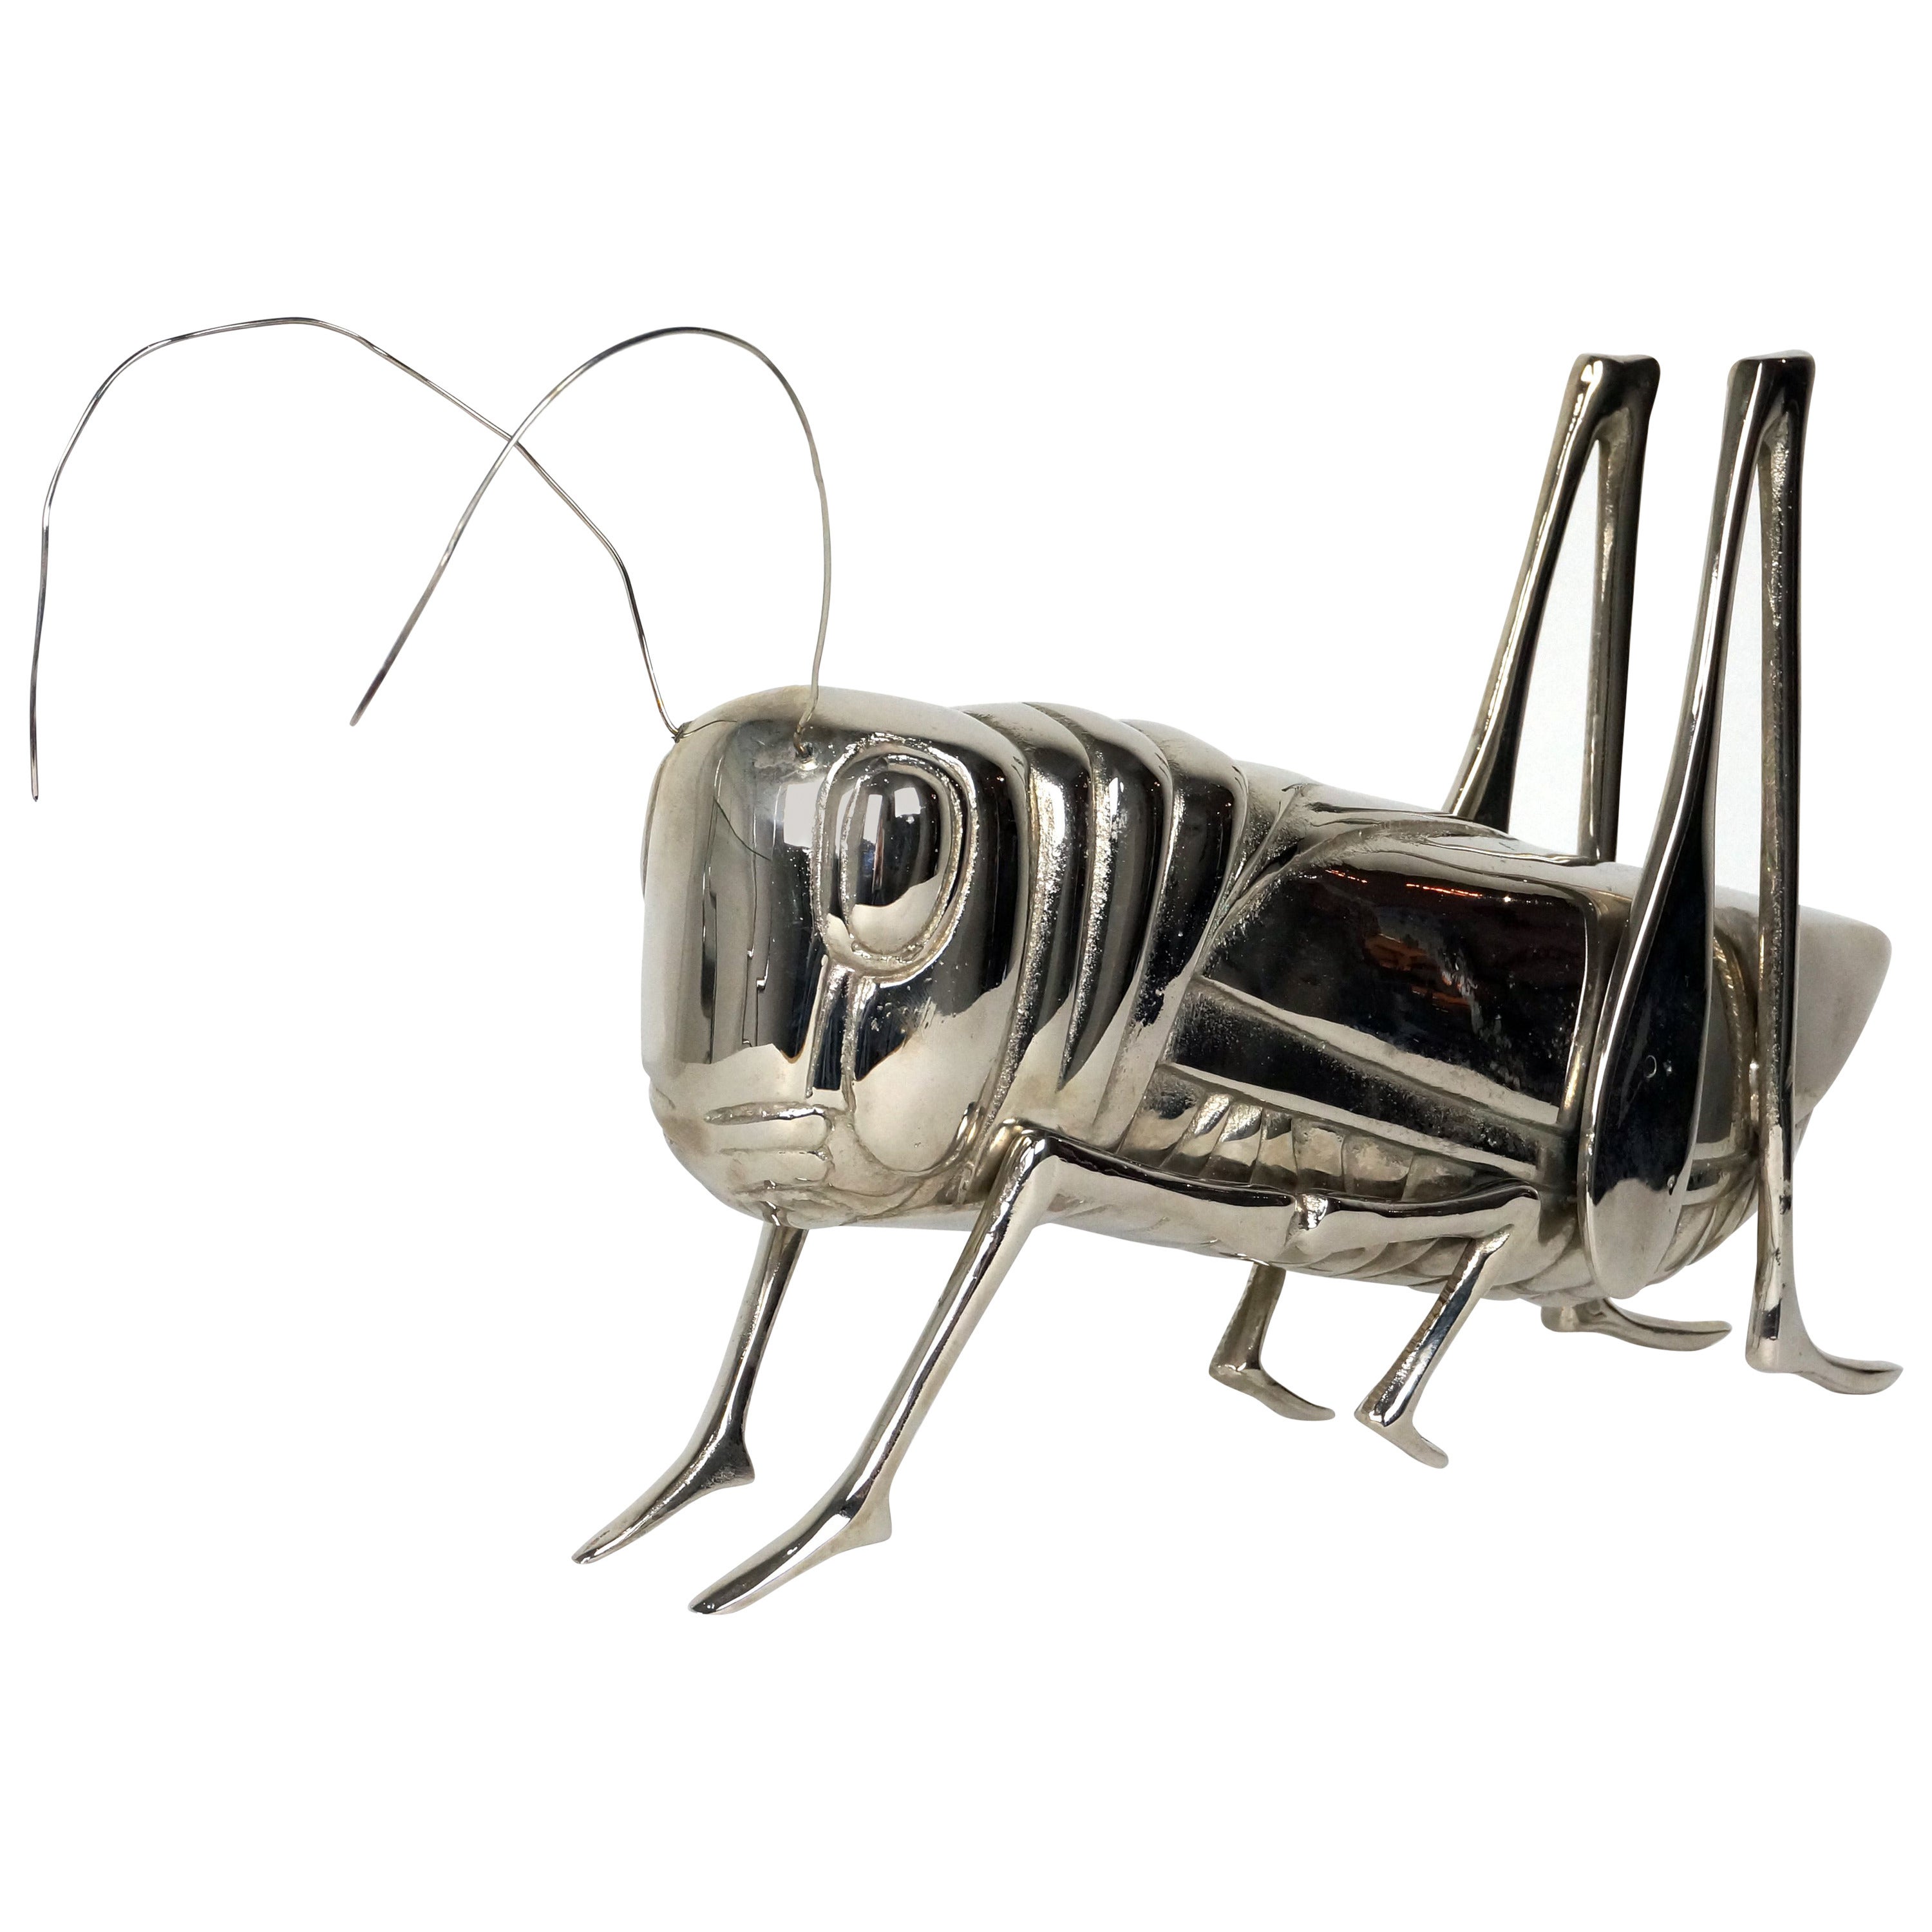 Nickel-Plated Sculpture of a Locust or Grasshopper, Mid-Century